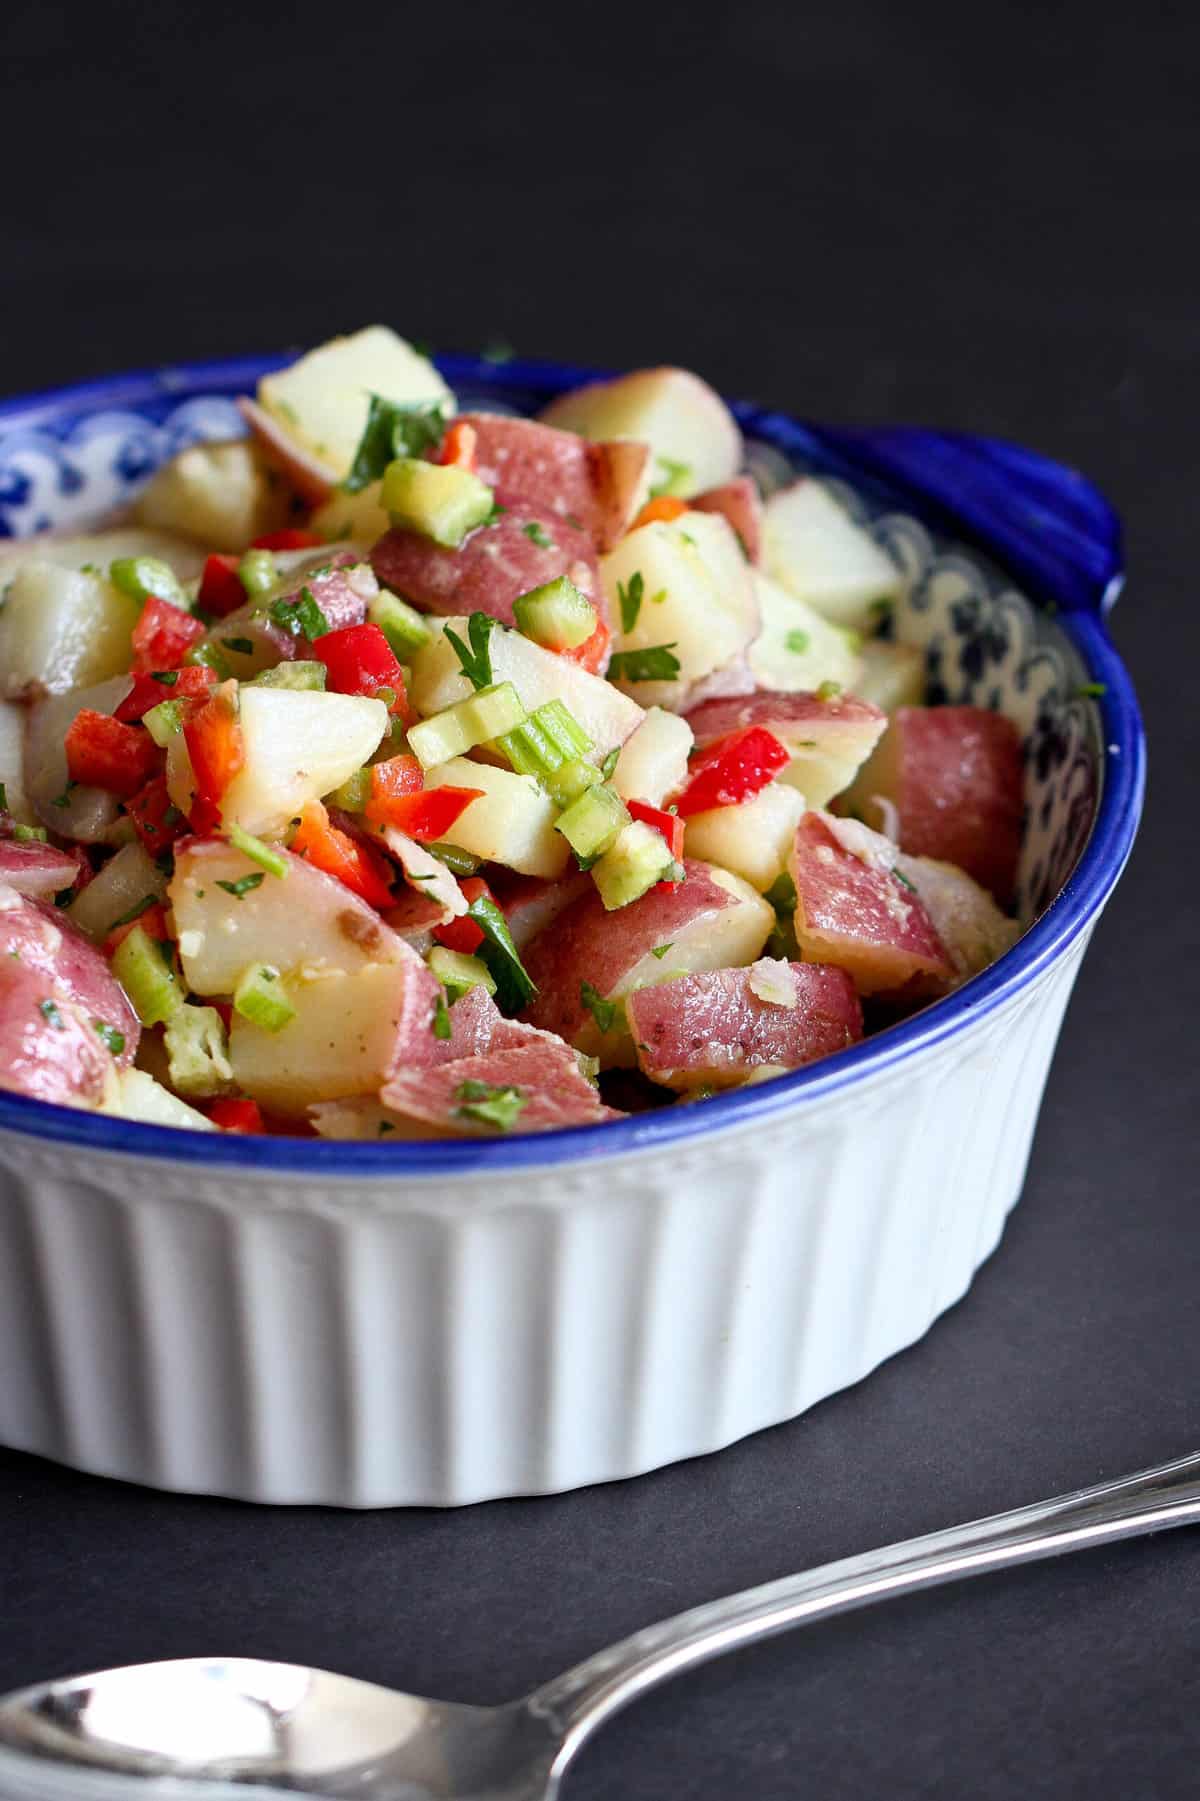 Say goodbye to the heavy, gloopy potato salads of the past – our Skinny Red Potato Salad without mayo is here to revolutionize your taste buds! Packed with colorful veggies and dressed in a zesty vinaigrette, it's the perfect way to indulge in a healthy meal. | No mayo | Recipe easy | No egg | Vegan | Plant based | WFPB | Vegetarian